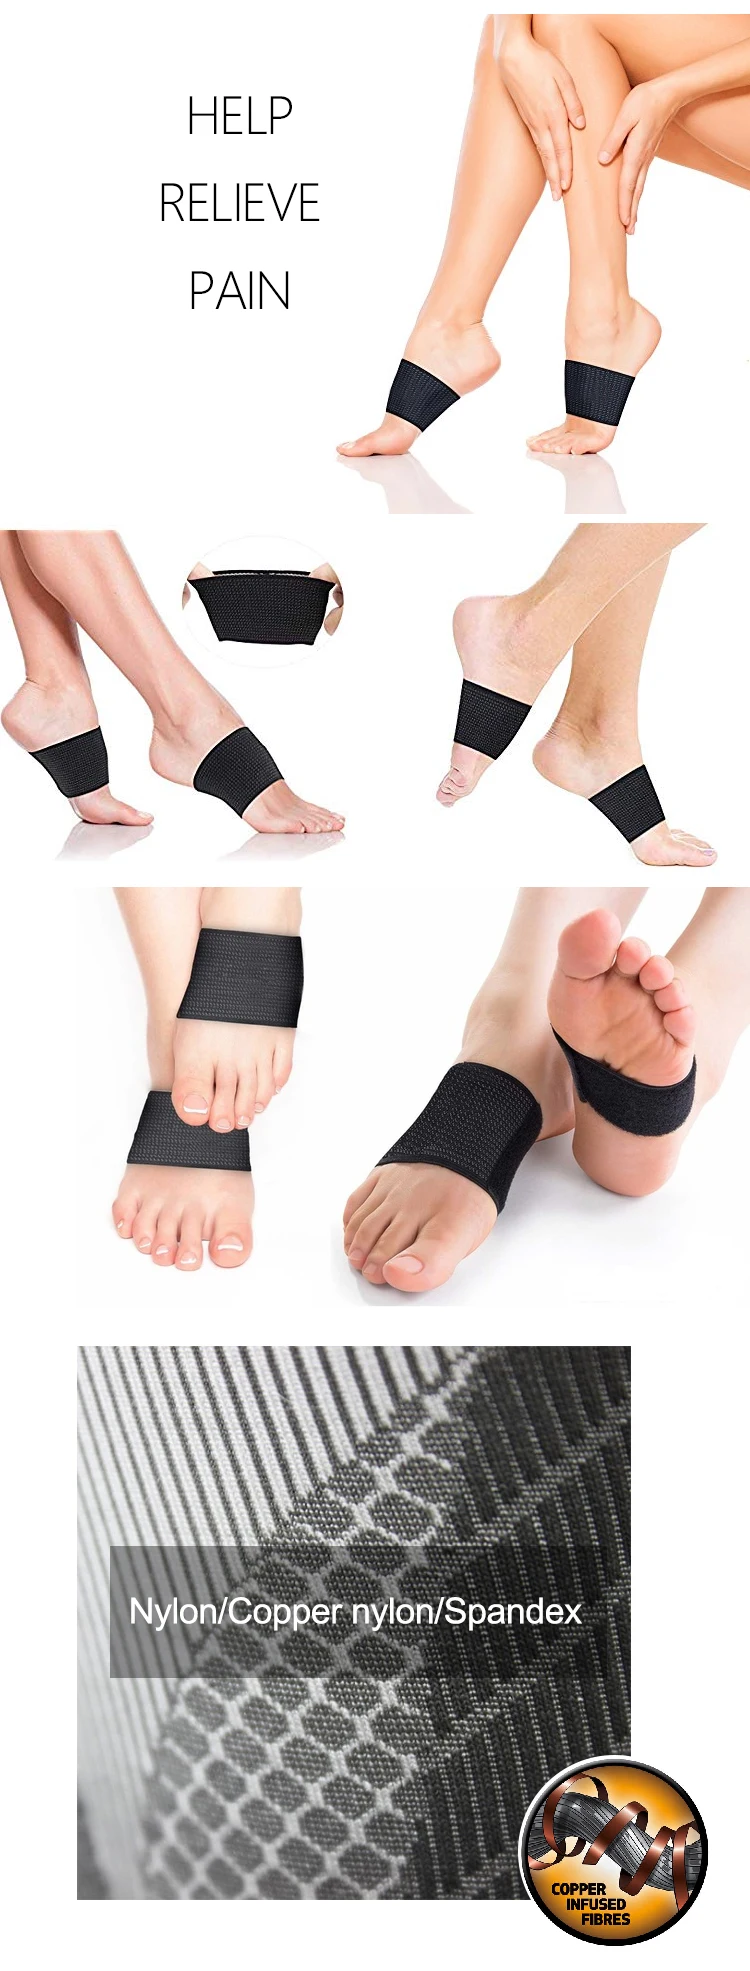 Enerup Plantar Fasciitis Seamless Customised Cheap Plastic Insole Orthotics Socks Foot Sleeve Insoles Arch Support